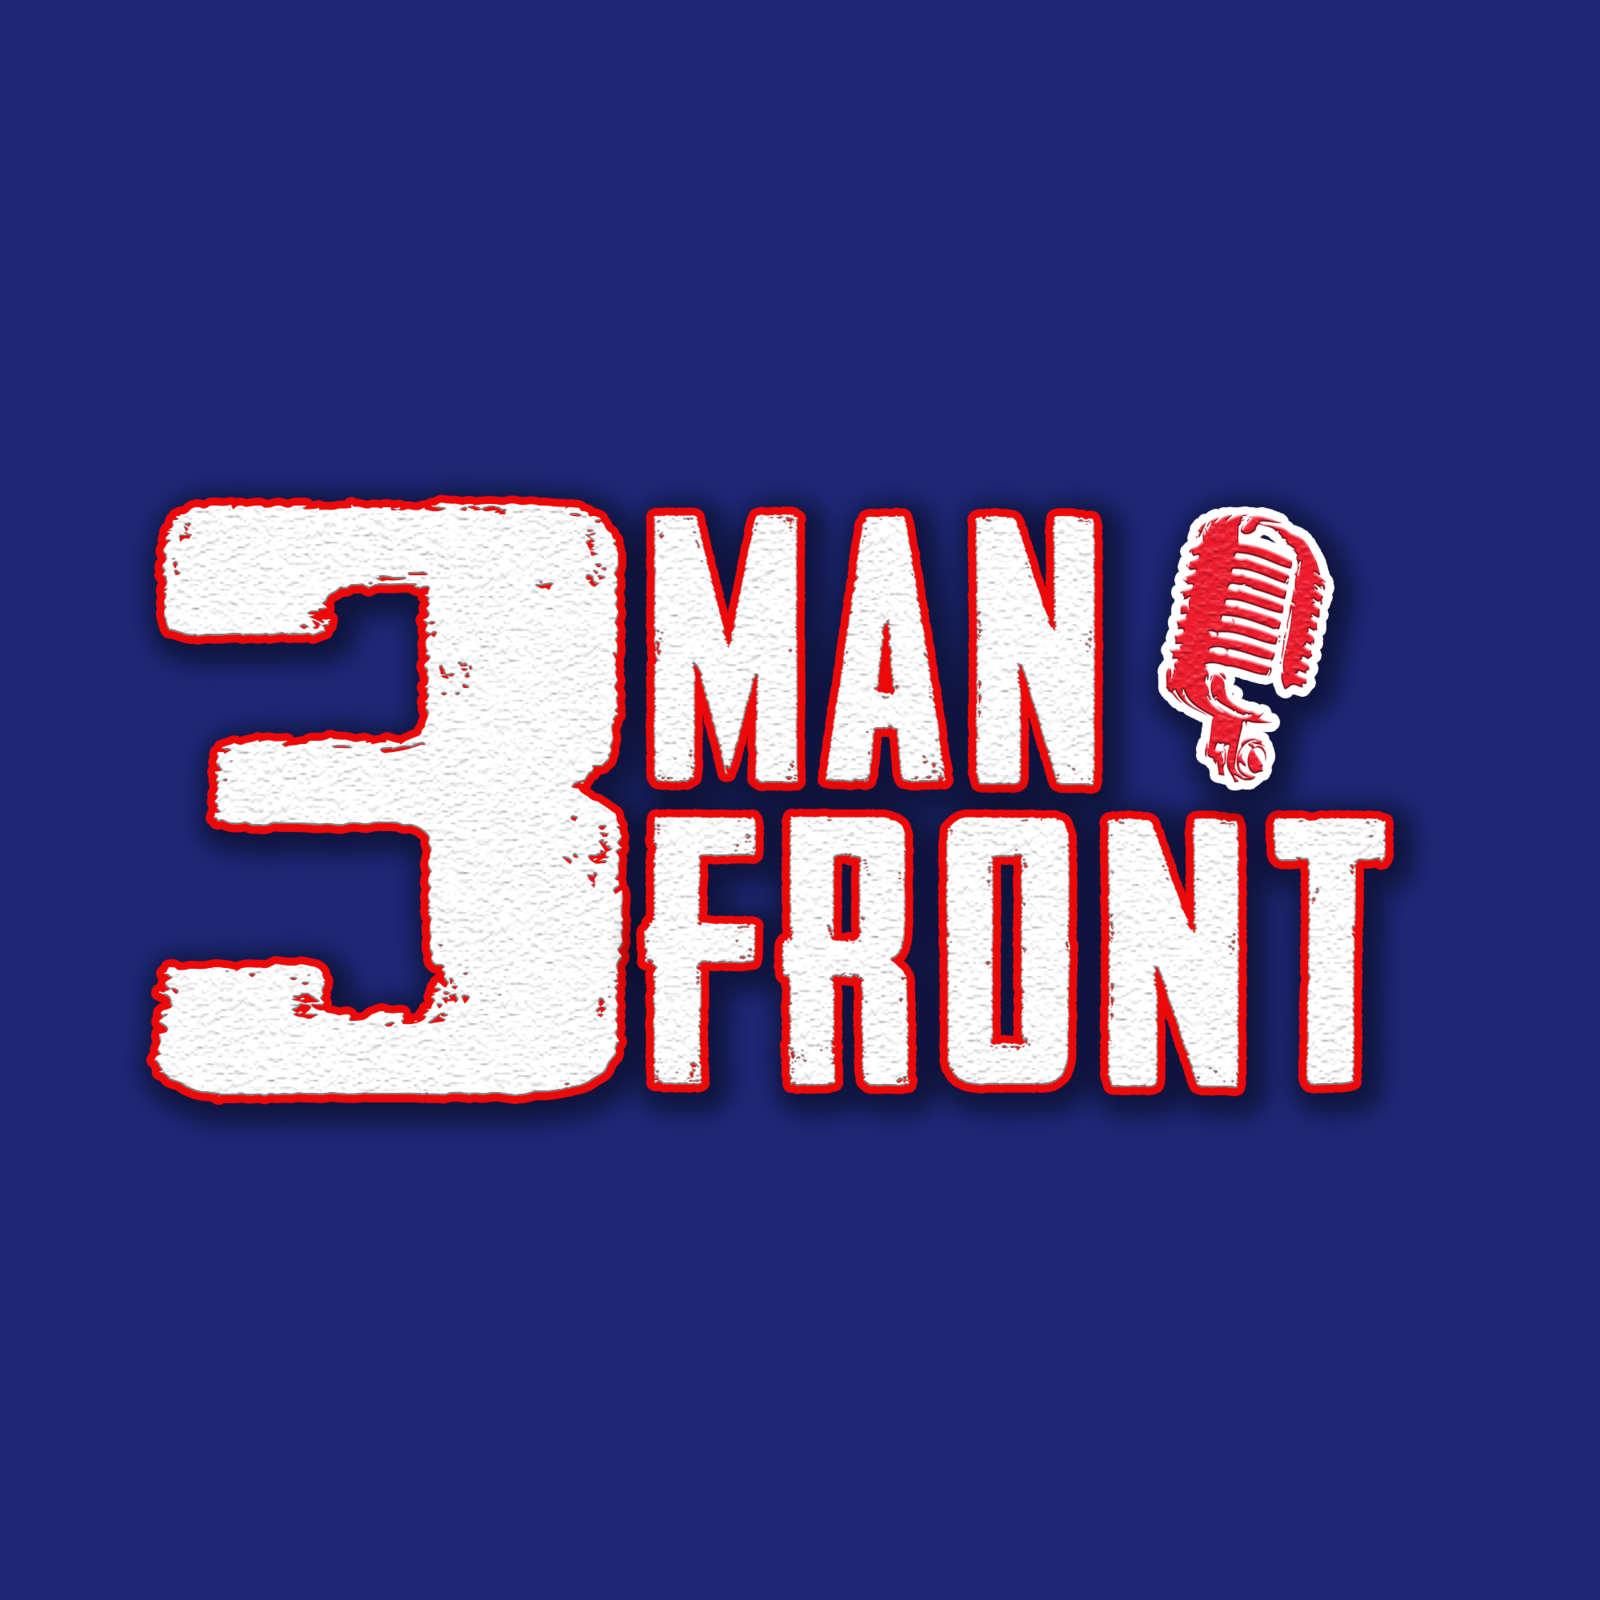 3 Man Front: Aaron Gershon from TheCatsPause247!